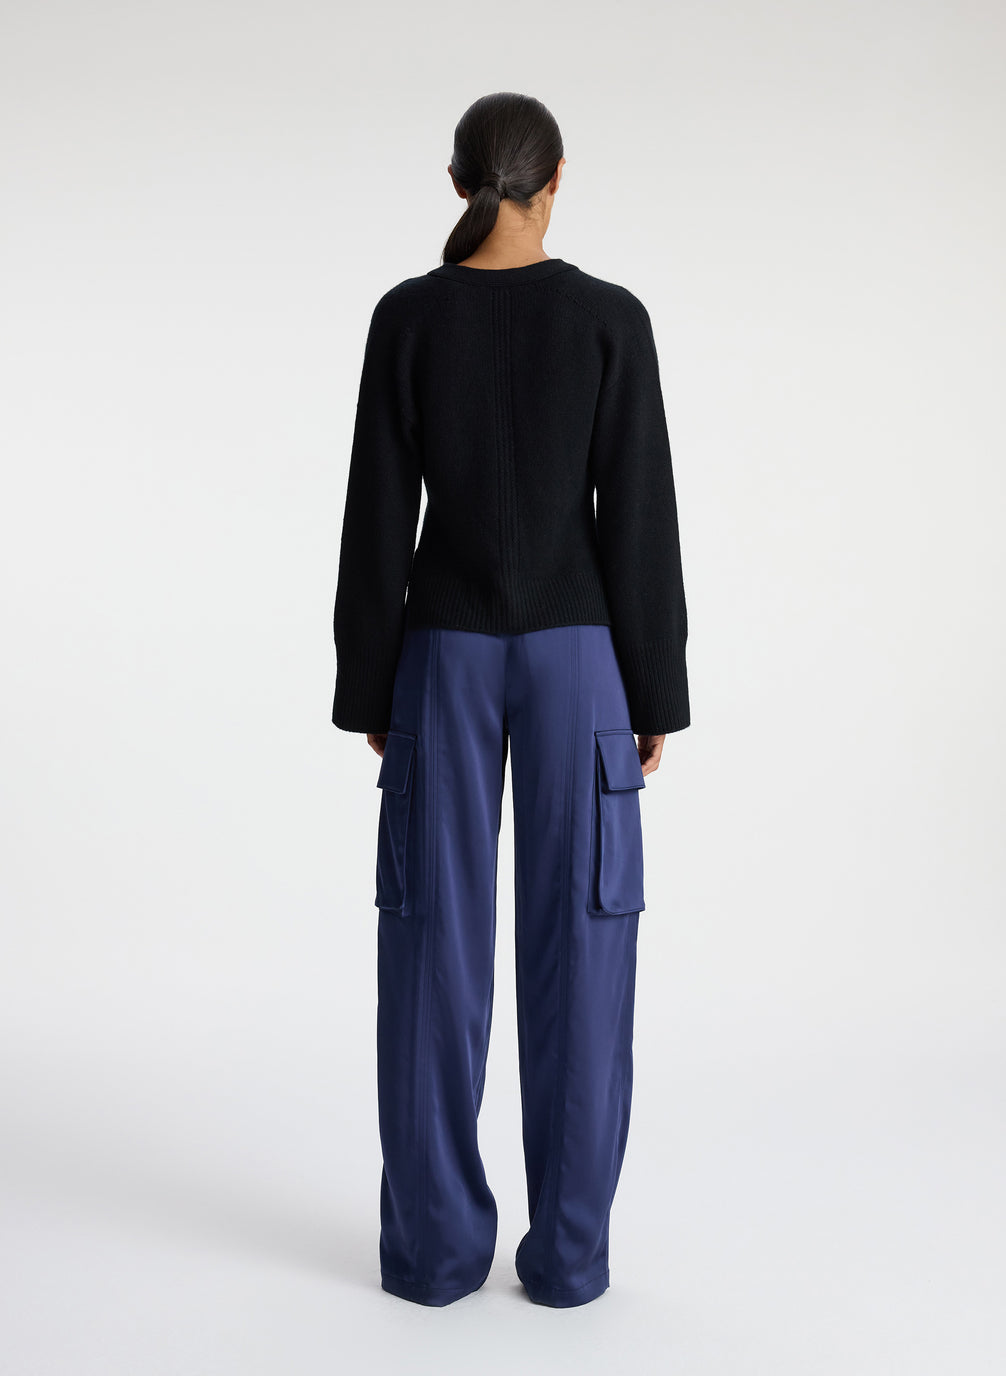 back view of woman wearing black cardigan with navy blue cargo pants